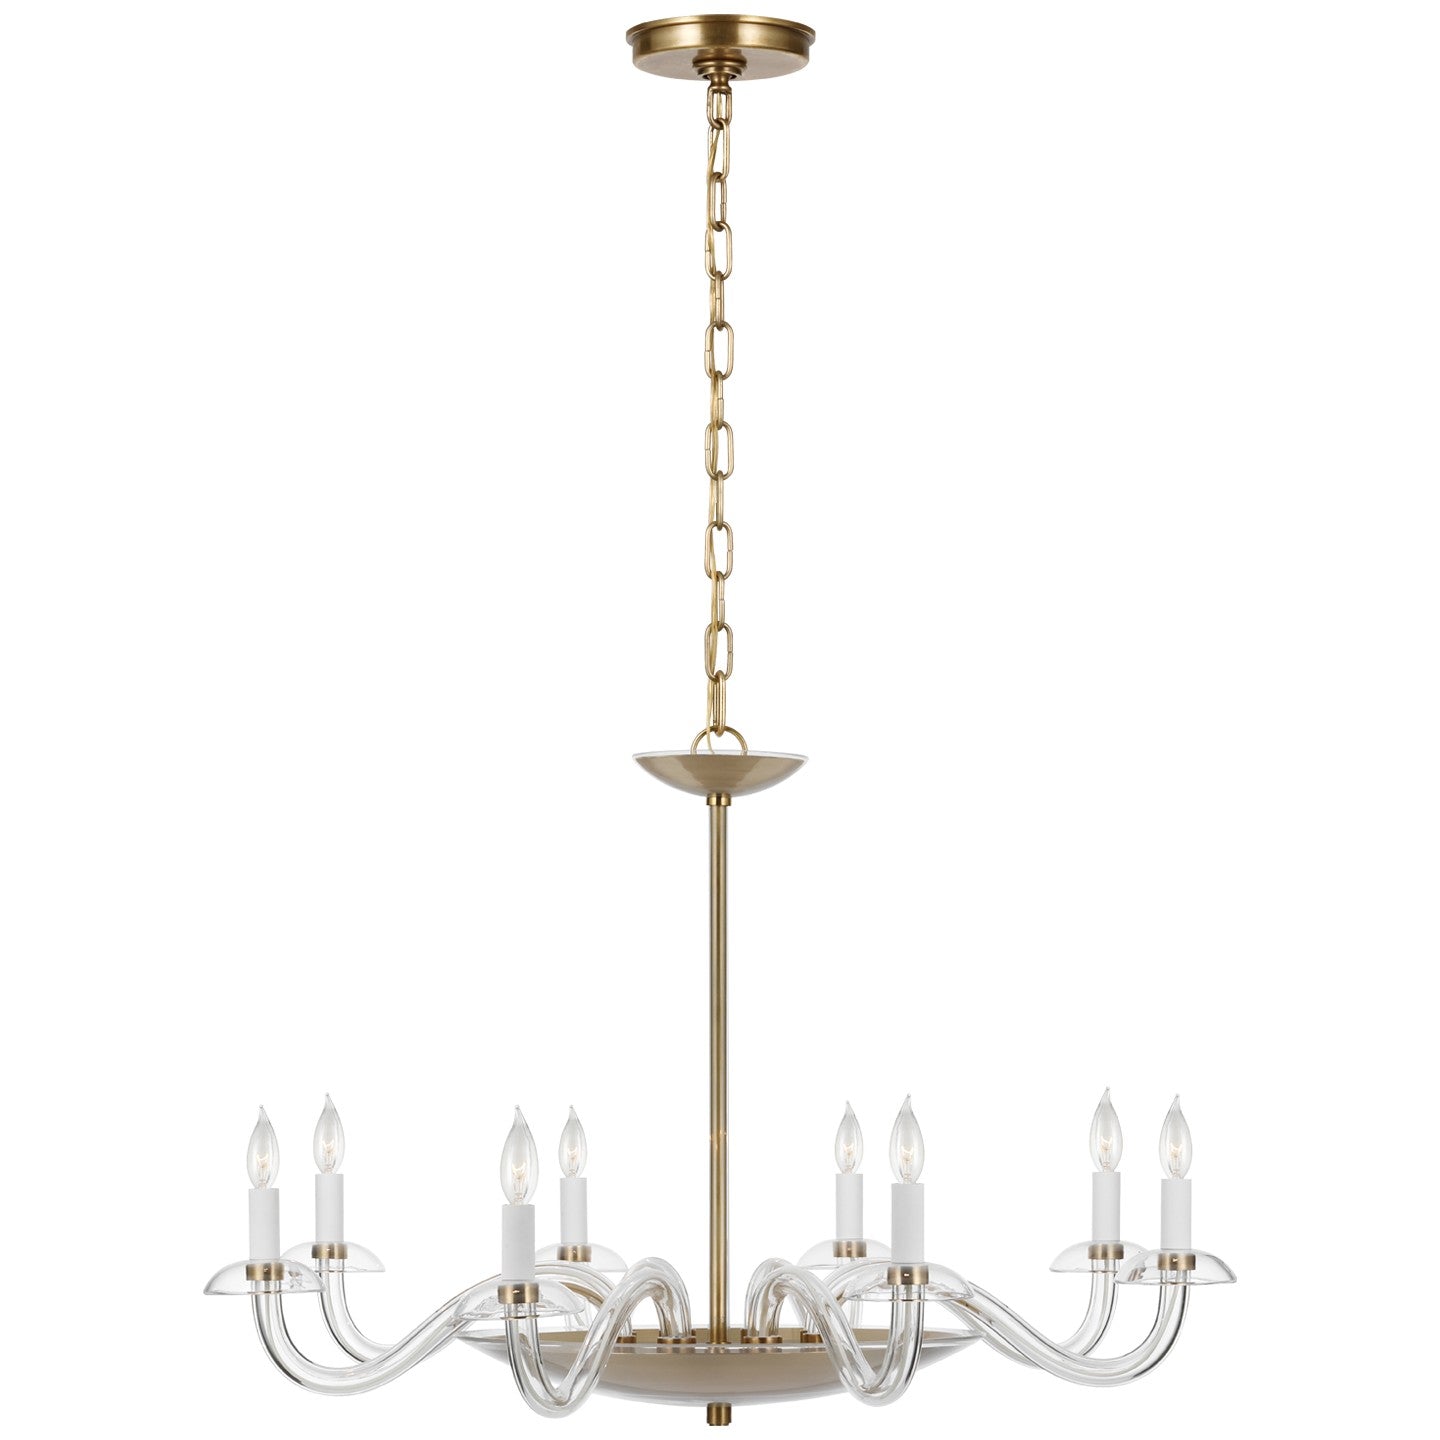 Load image into Gallery viewer, Visual Comfort Signature - PCD 5020CG/HAB - LED Chandelier - Brigitte - Clear Glass and Hand-Rubbed Antique Brass
